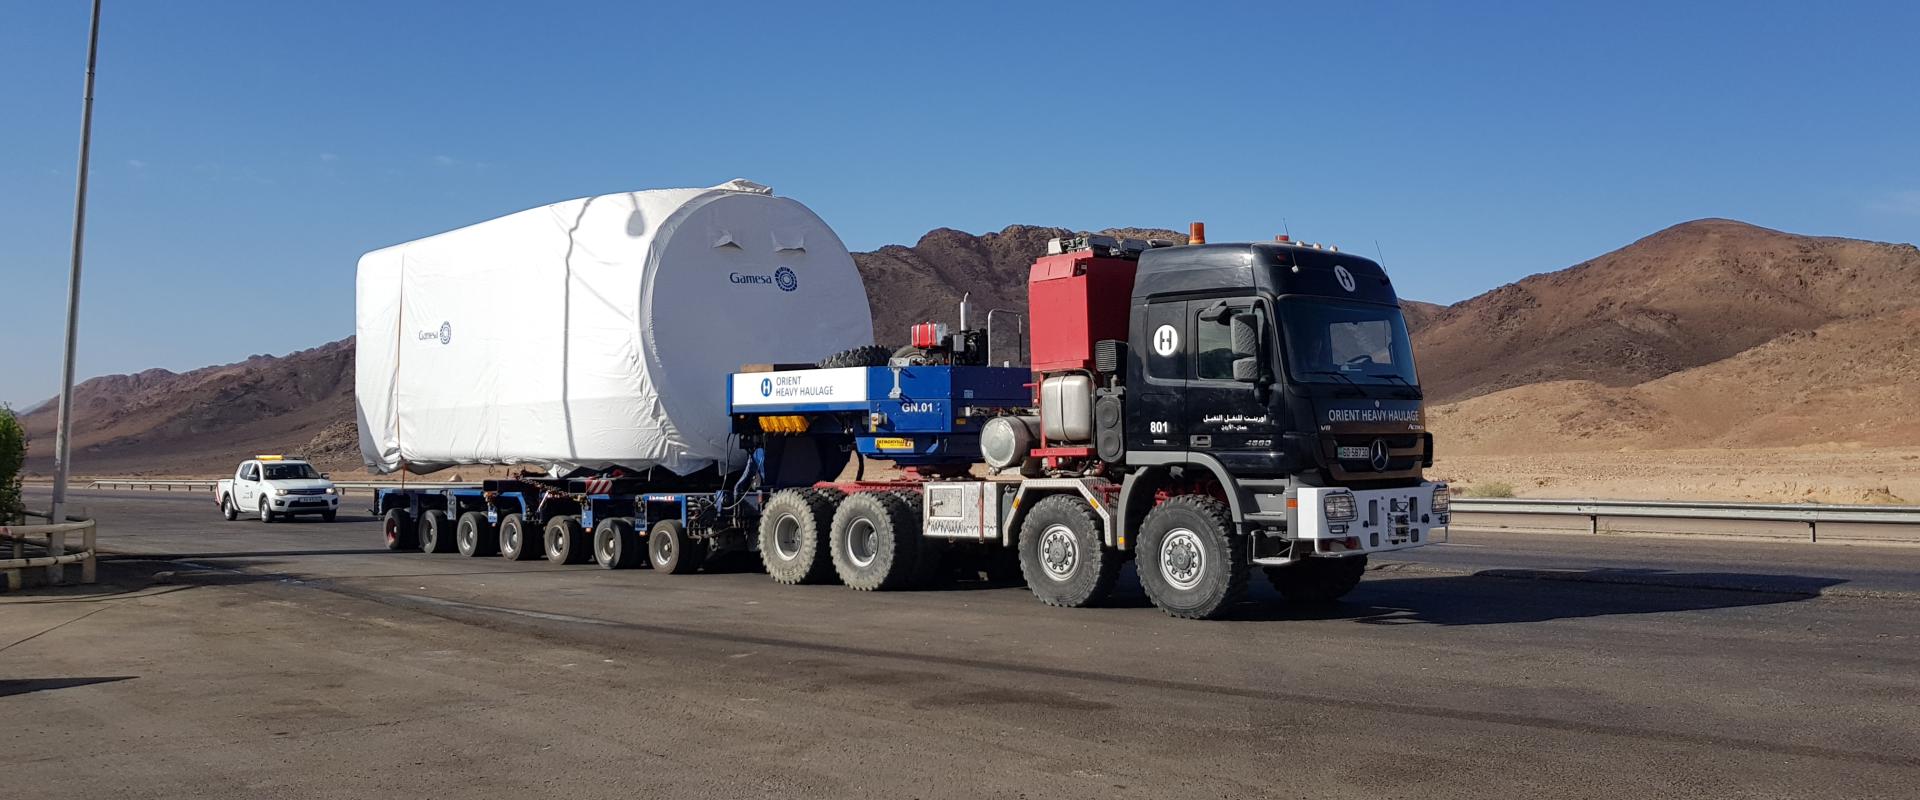 OHH - Transport of Siemens Gamesa 100t Nacelle